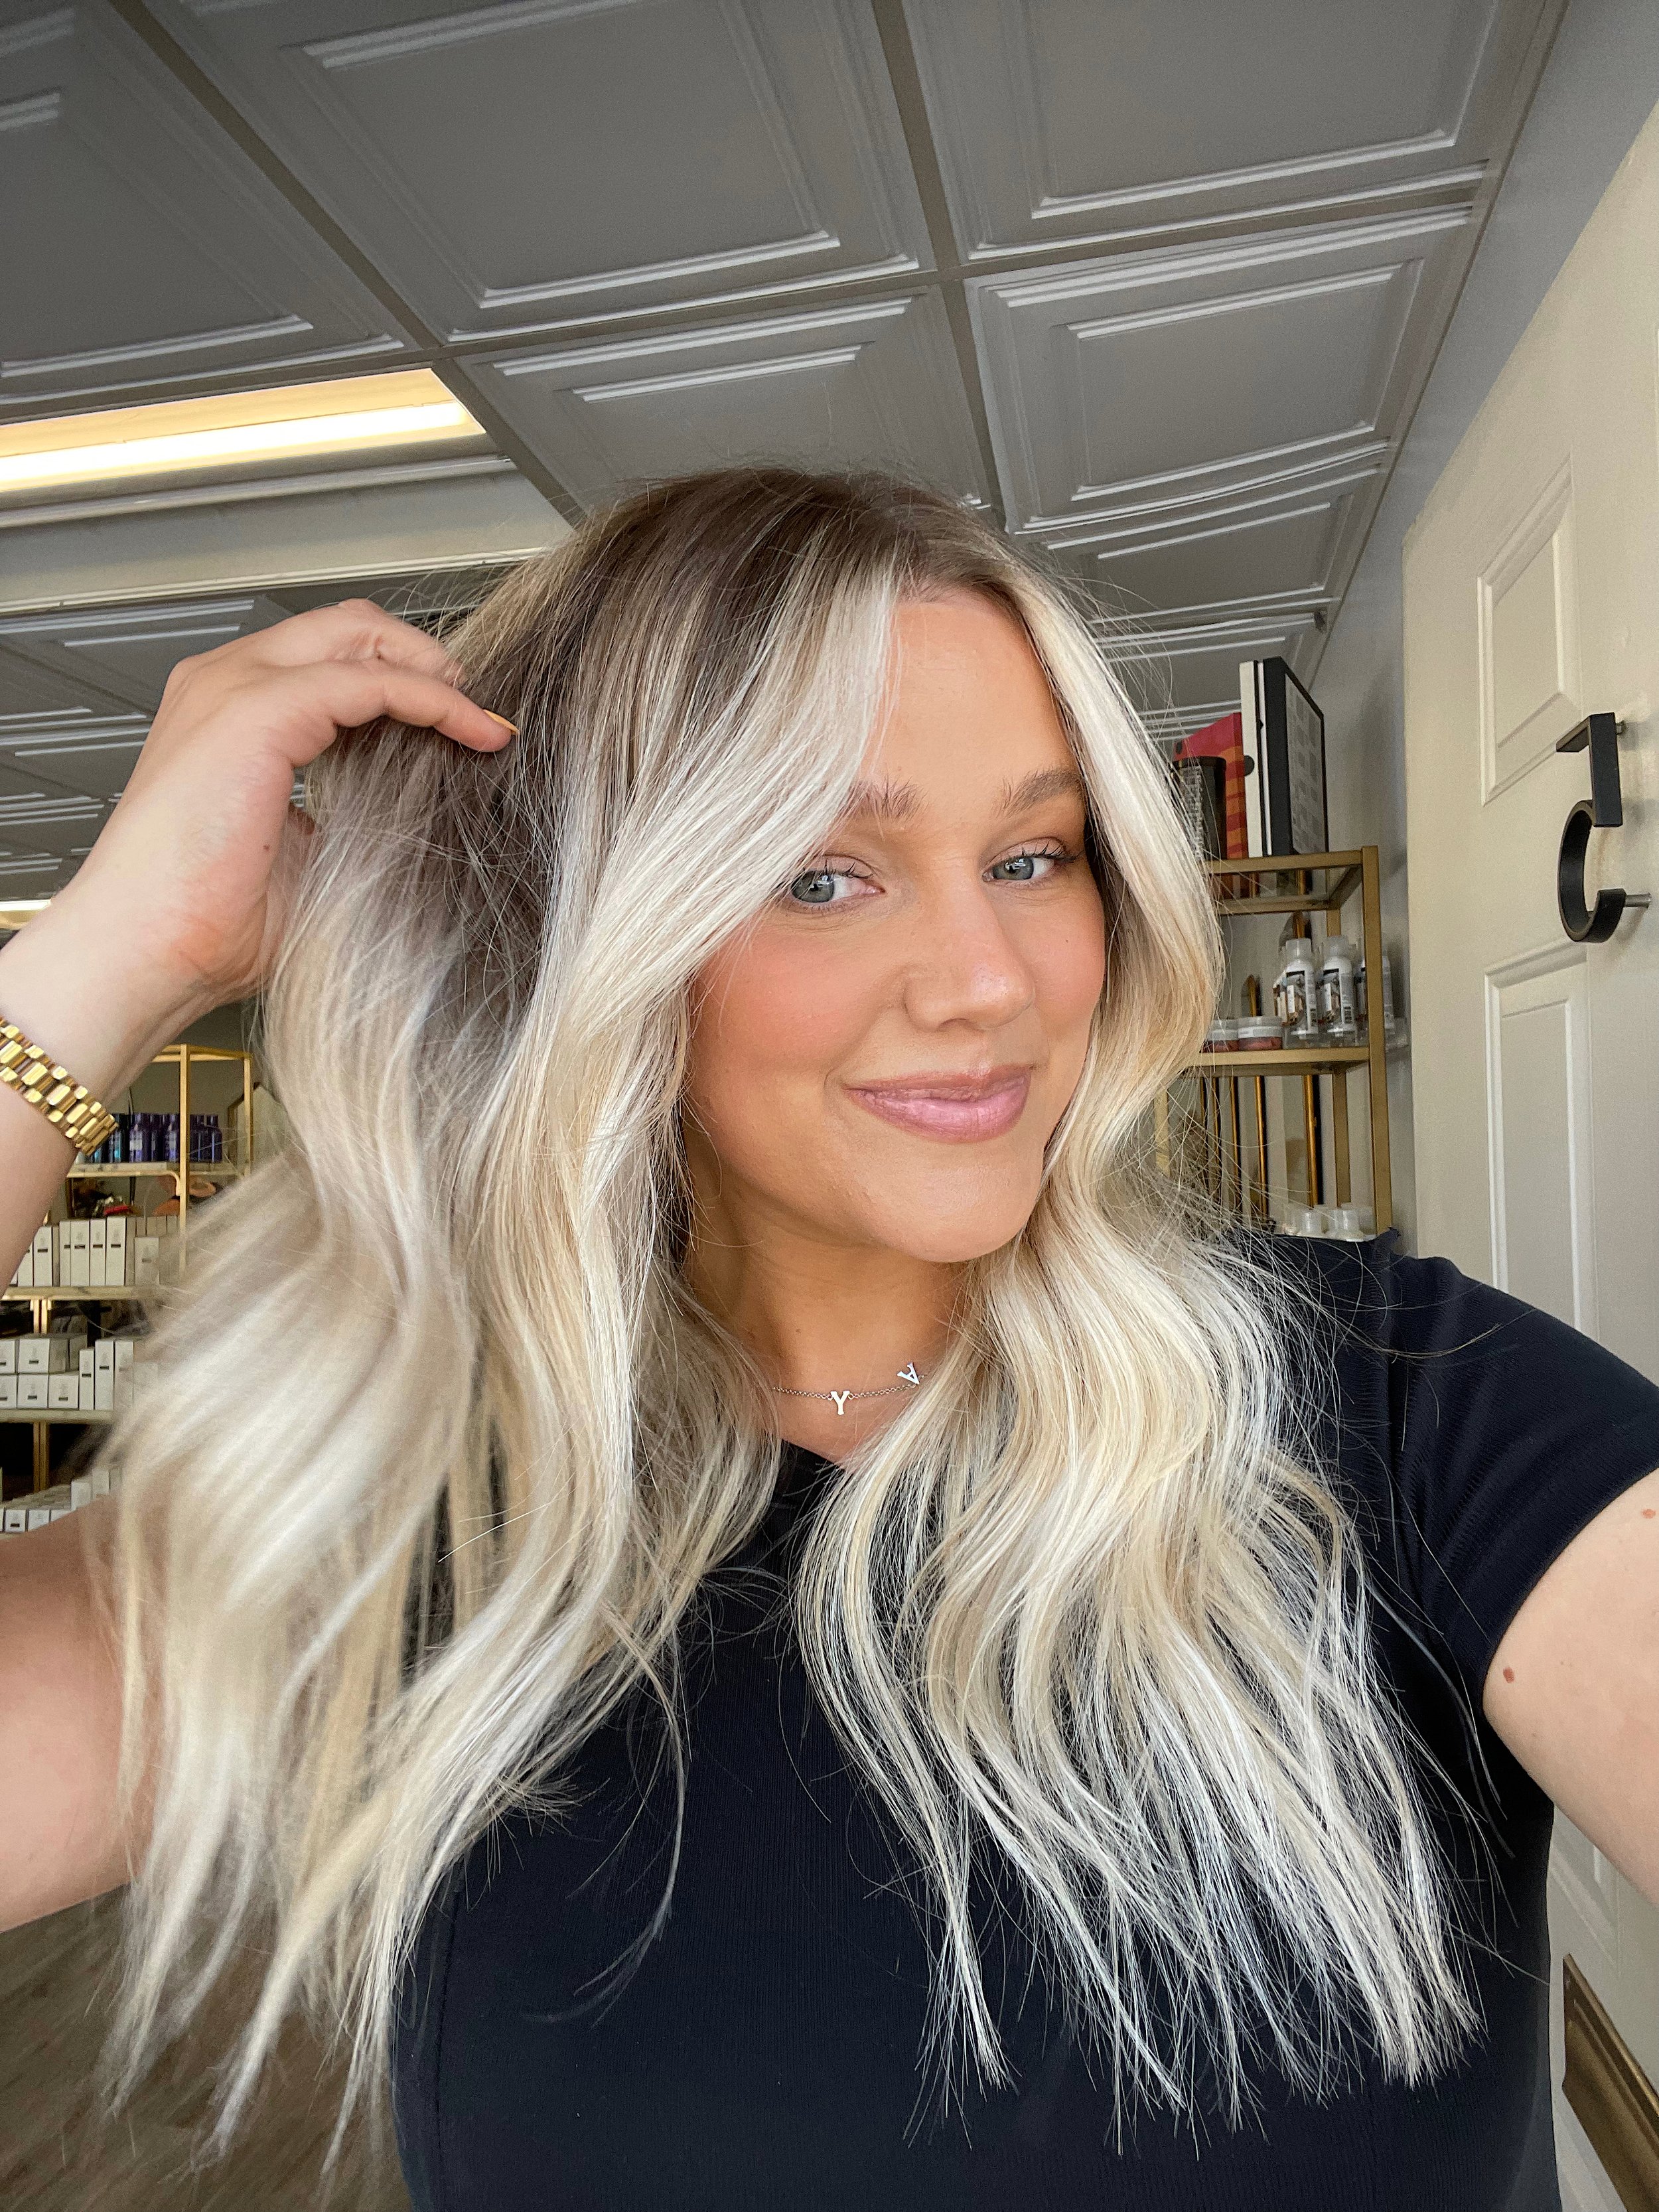 Bre Sheppard New Hair For Fall - Bright Blonde Rooted Brown Natural - Hair Inspo.JPG